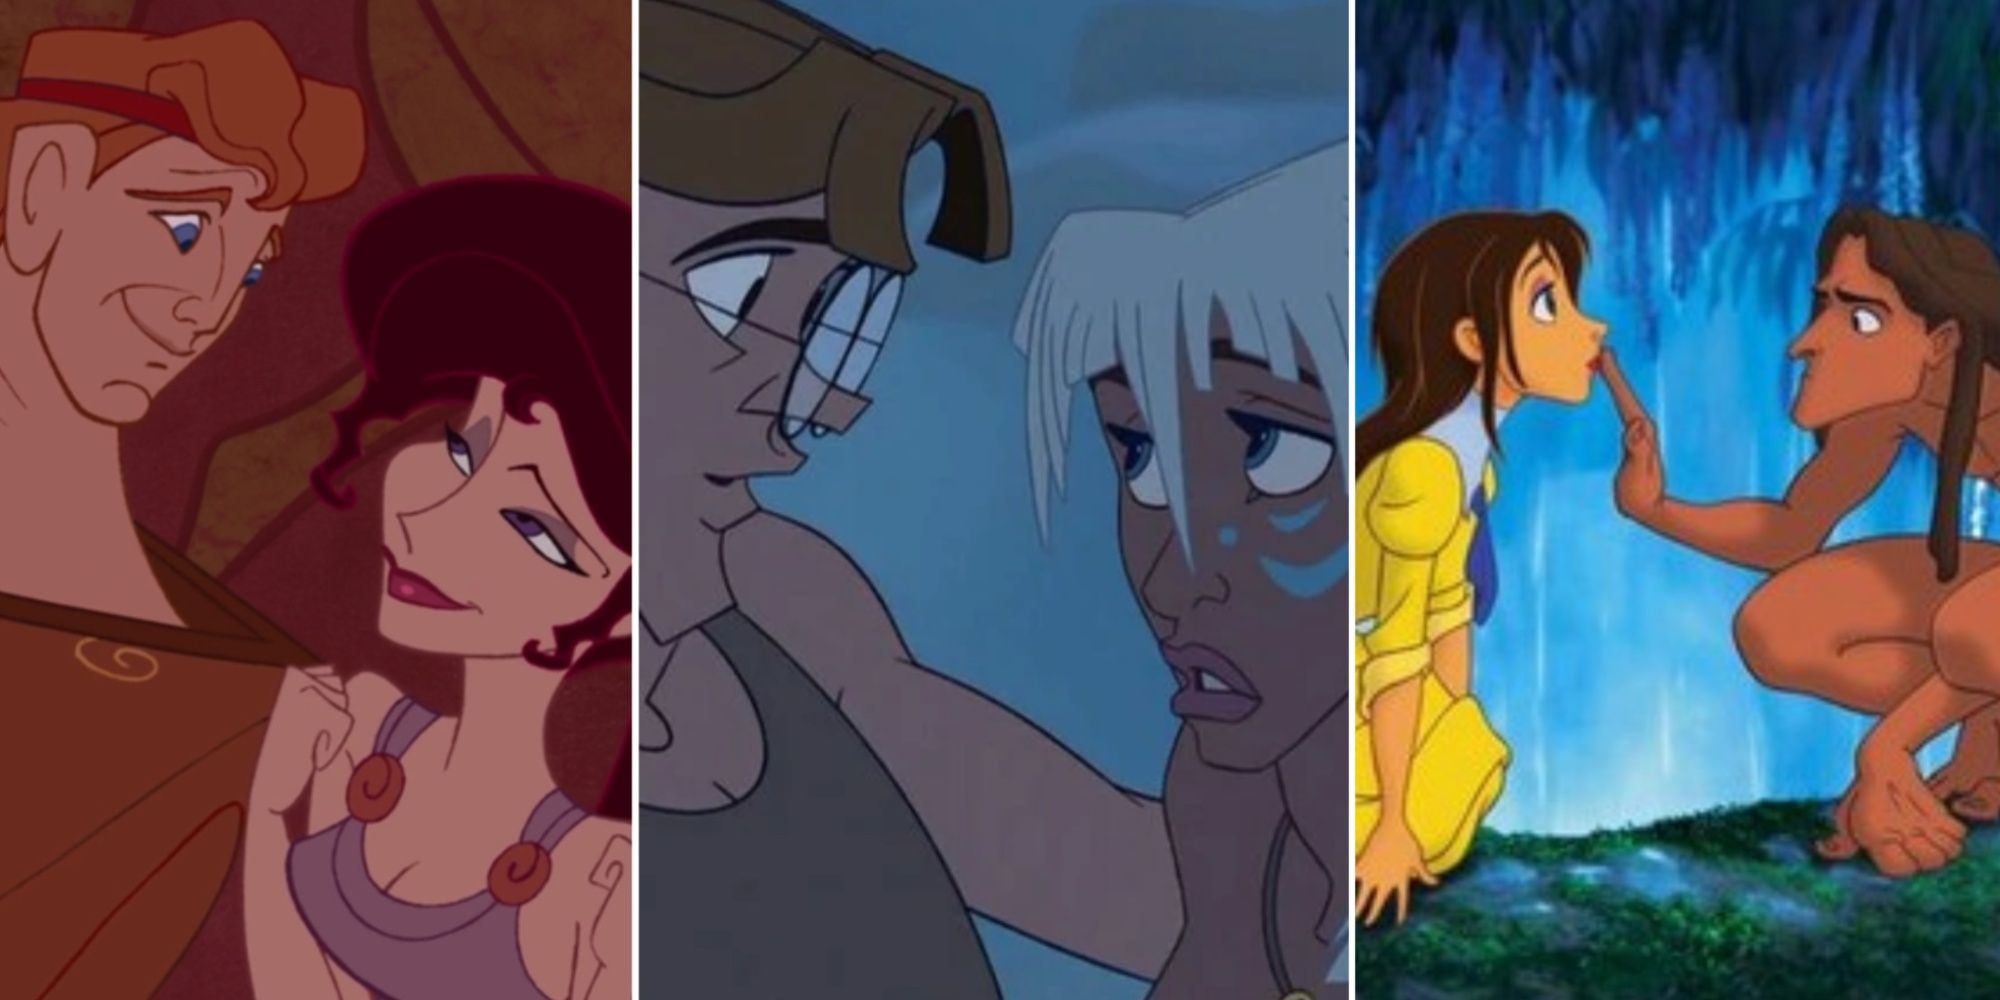 Cover Image For Best Disney Couples With Images From Hercules, Atlantis The Lost Empire, And Tarzan